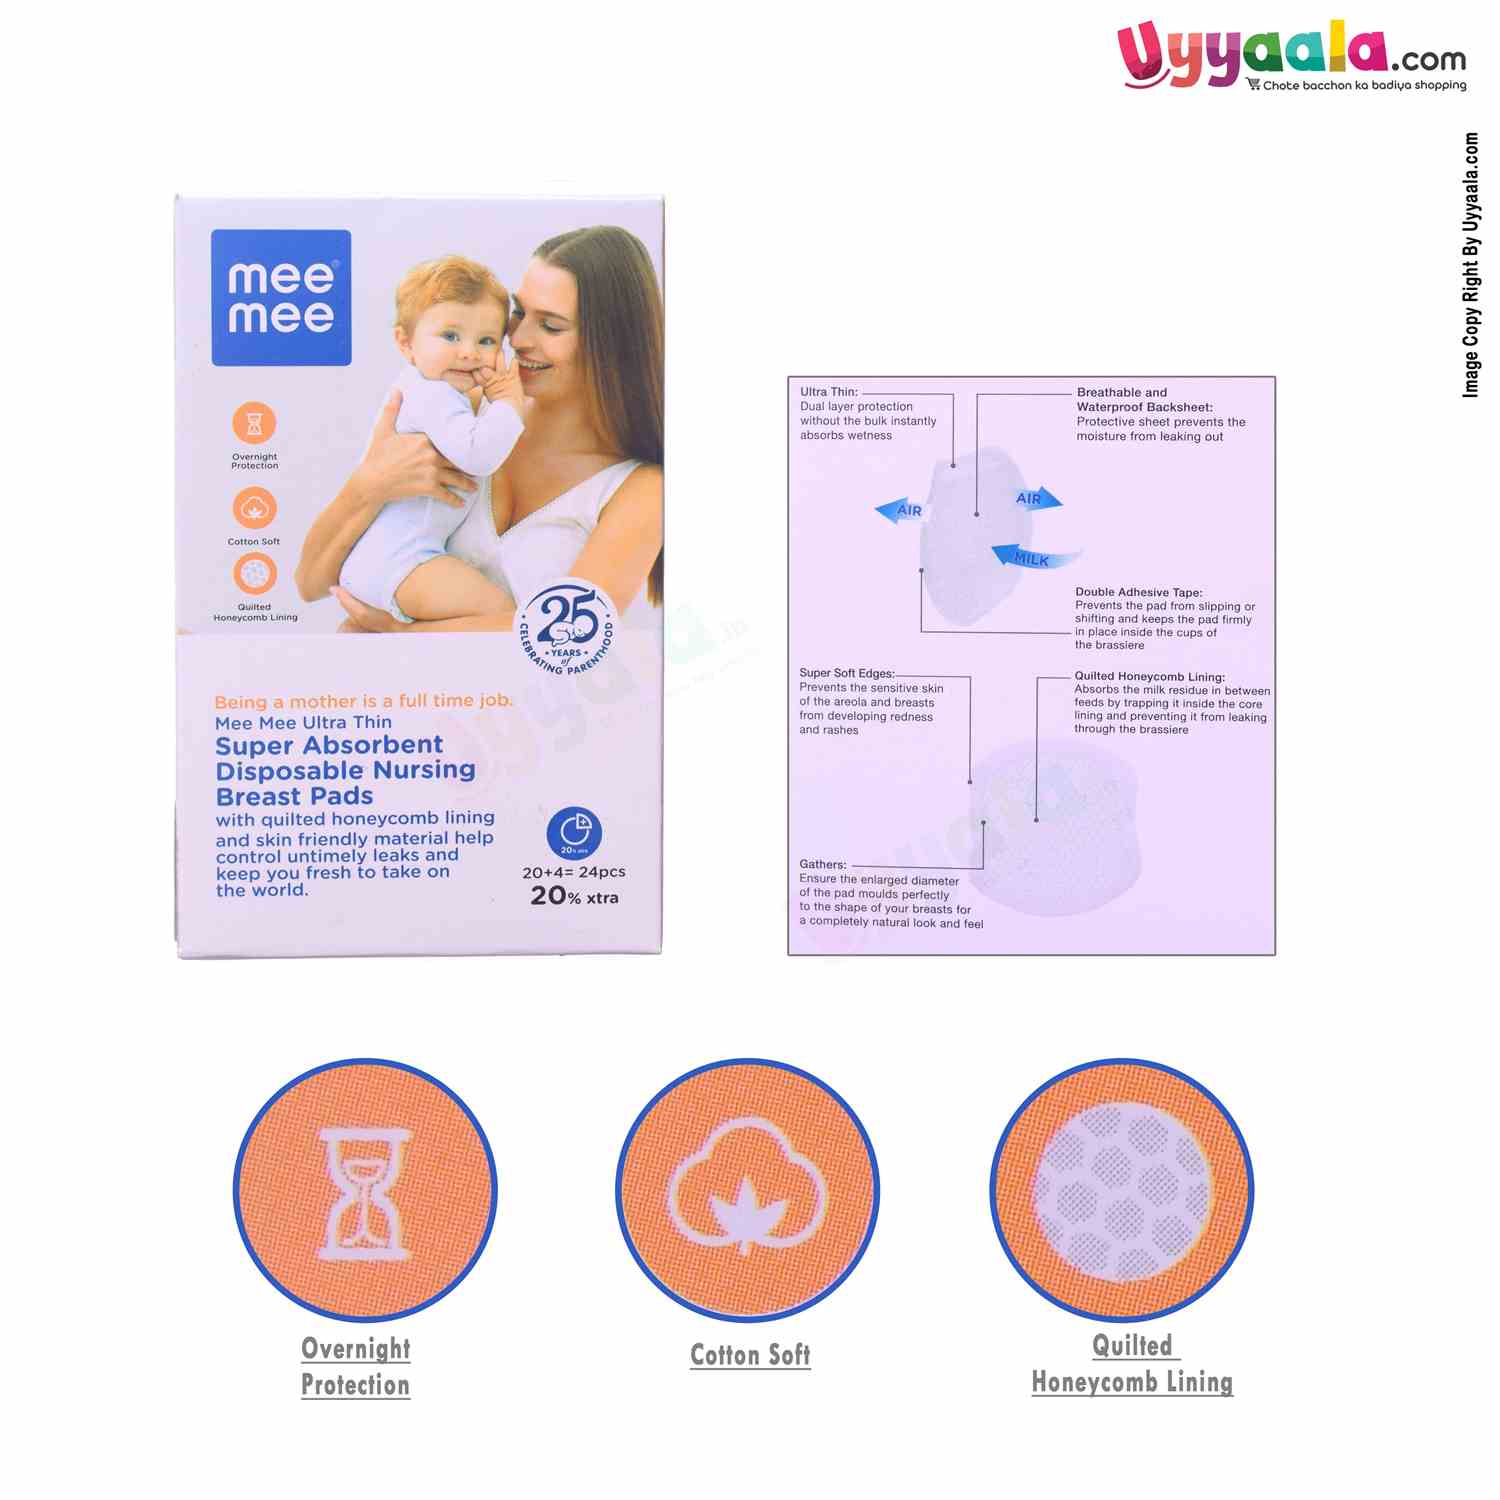 MEE MEE Super Absorbent Disposable Nursing Breast Pads - 24pcs